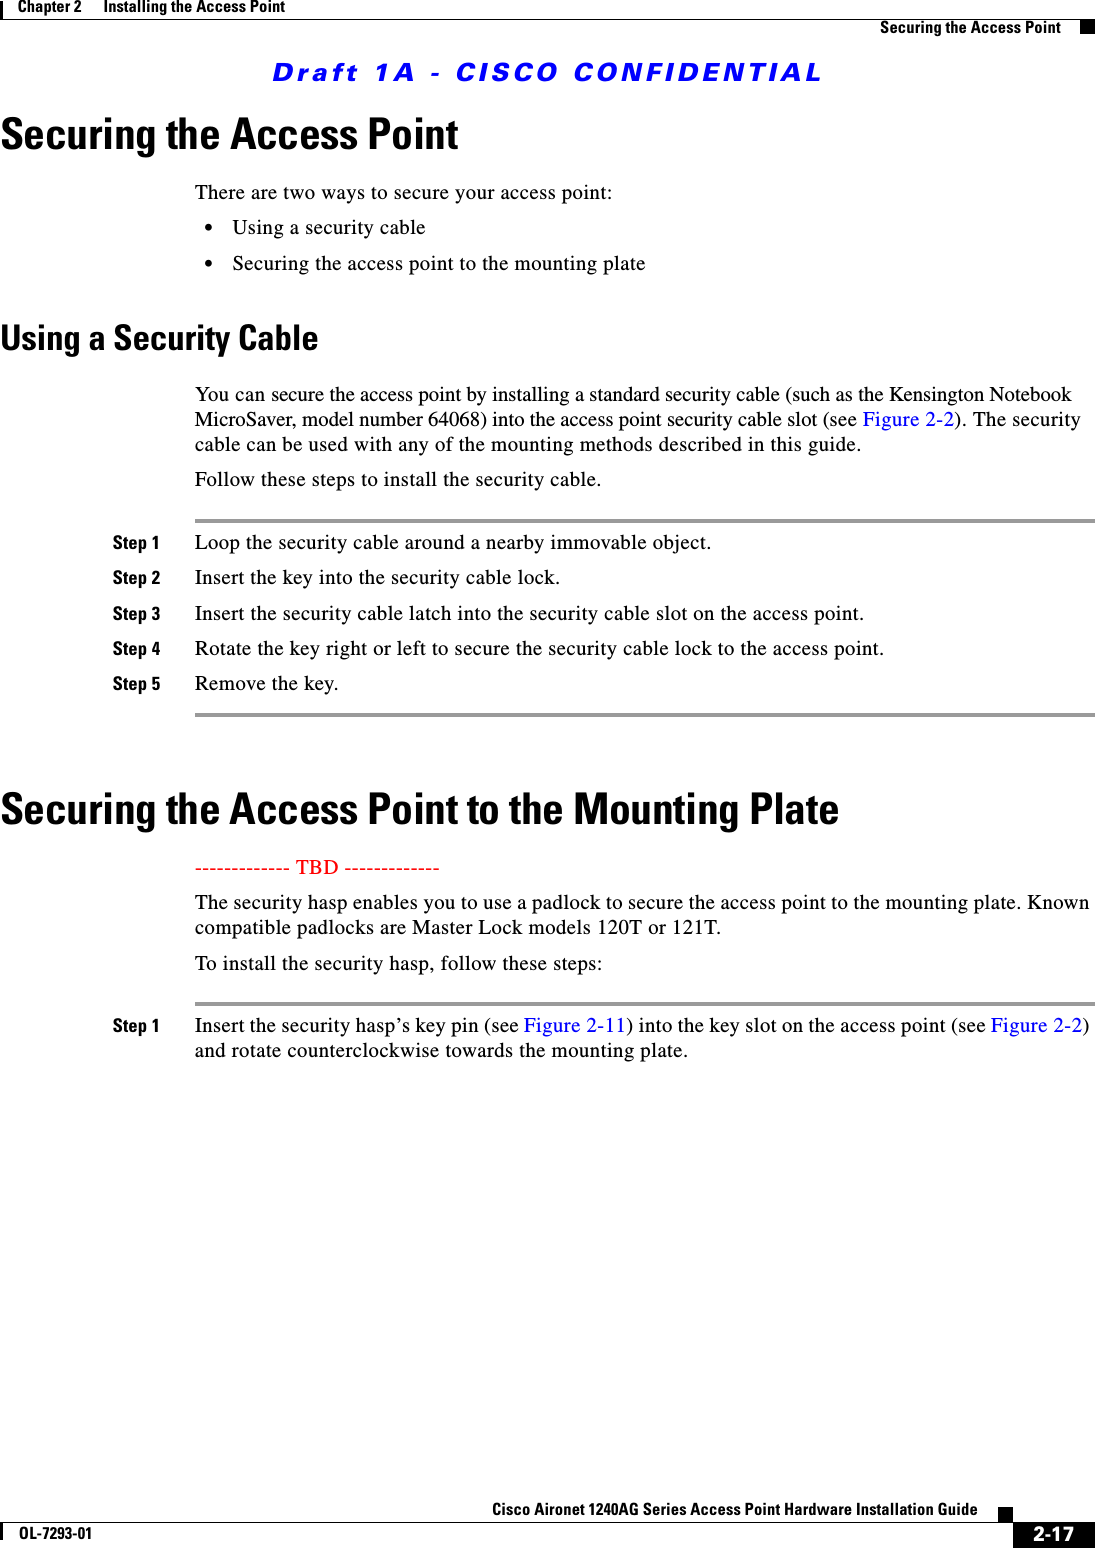 Draft 1A - CISCO CONFIDENTIAL2-17Cisco Aironet 1240AG Series Access Point Hardware Installation GuideOL-7293-01Chapter 2      Installing the Access PointSecuring the Access PointSecuring the Access PointThere are two ways to secure your access point:•Using a security cable•Securing the access point to the mounting plateUsing a Security CableYou can secure the access point by installing a standard security cable (such as the Kensington Notebook MicroSaver, model number 64068) into the access point security cable slot (see Figure 2-2). The security cable can be used with any of the mounting methods described in this guide. Follow these steps to install the security cable.Step 1 Loop the security cable around a nearby immovable object. Step 2 Insert the key into the security cable lock. Step 3 Insert the security cable latch into the security cable slot on the access point. Step 4 Rotate the key right or left to secure the security cable lock to the access point. Step 5 Remove the key. Securing the Access Point to the Mounting Plate------------- TBD ------------- The security hasp enables you to use a padlock to secure the access point to the mounting plate. Known compatible padlocks are Master Lock models 120T or 121T.To install the security hasp, follow these steps:Step 1 Insert the security hasp’s key pin (see Figure 2-11) into the key slot on the access point (see Figure 2-2) and rotate counterclockwise towards the mounting plate.